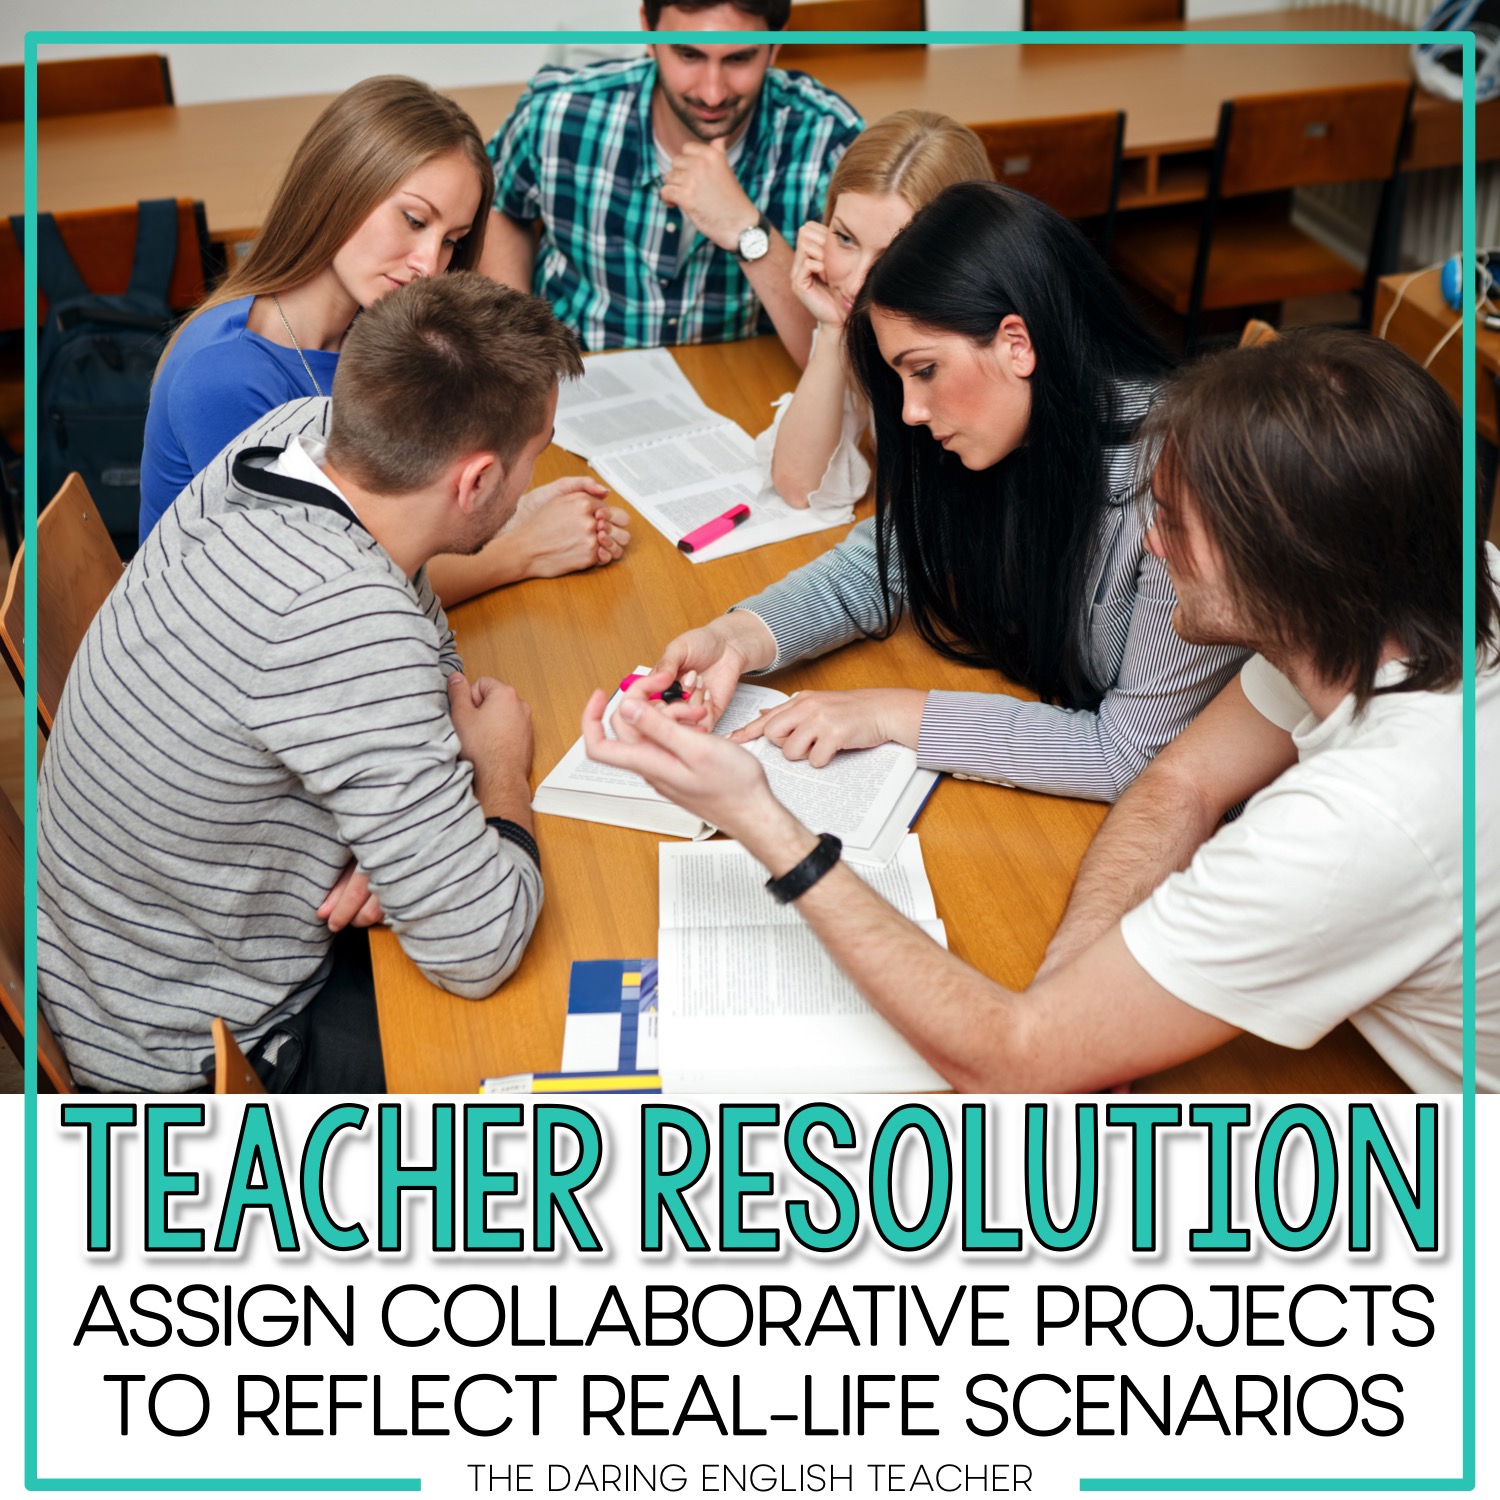 Teacher New Year's Resolutions to help make a difference